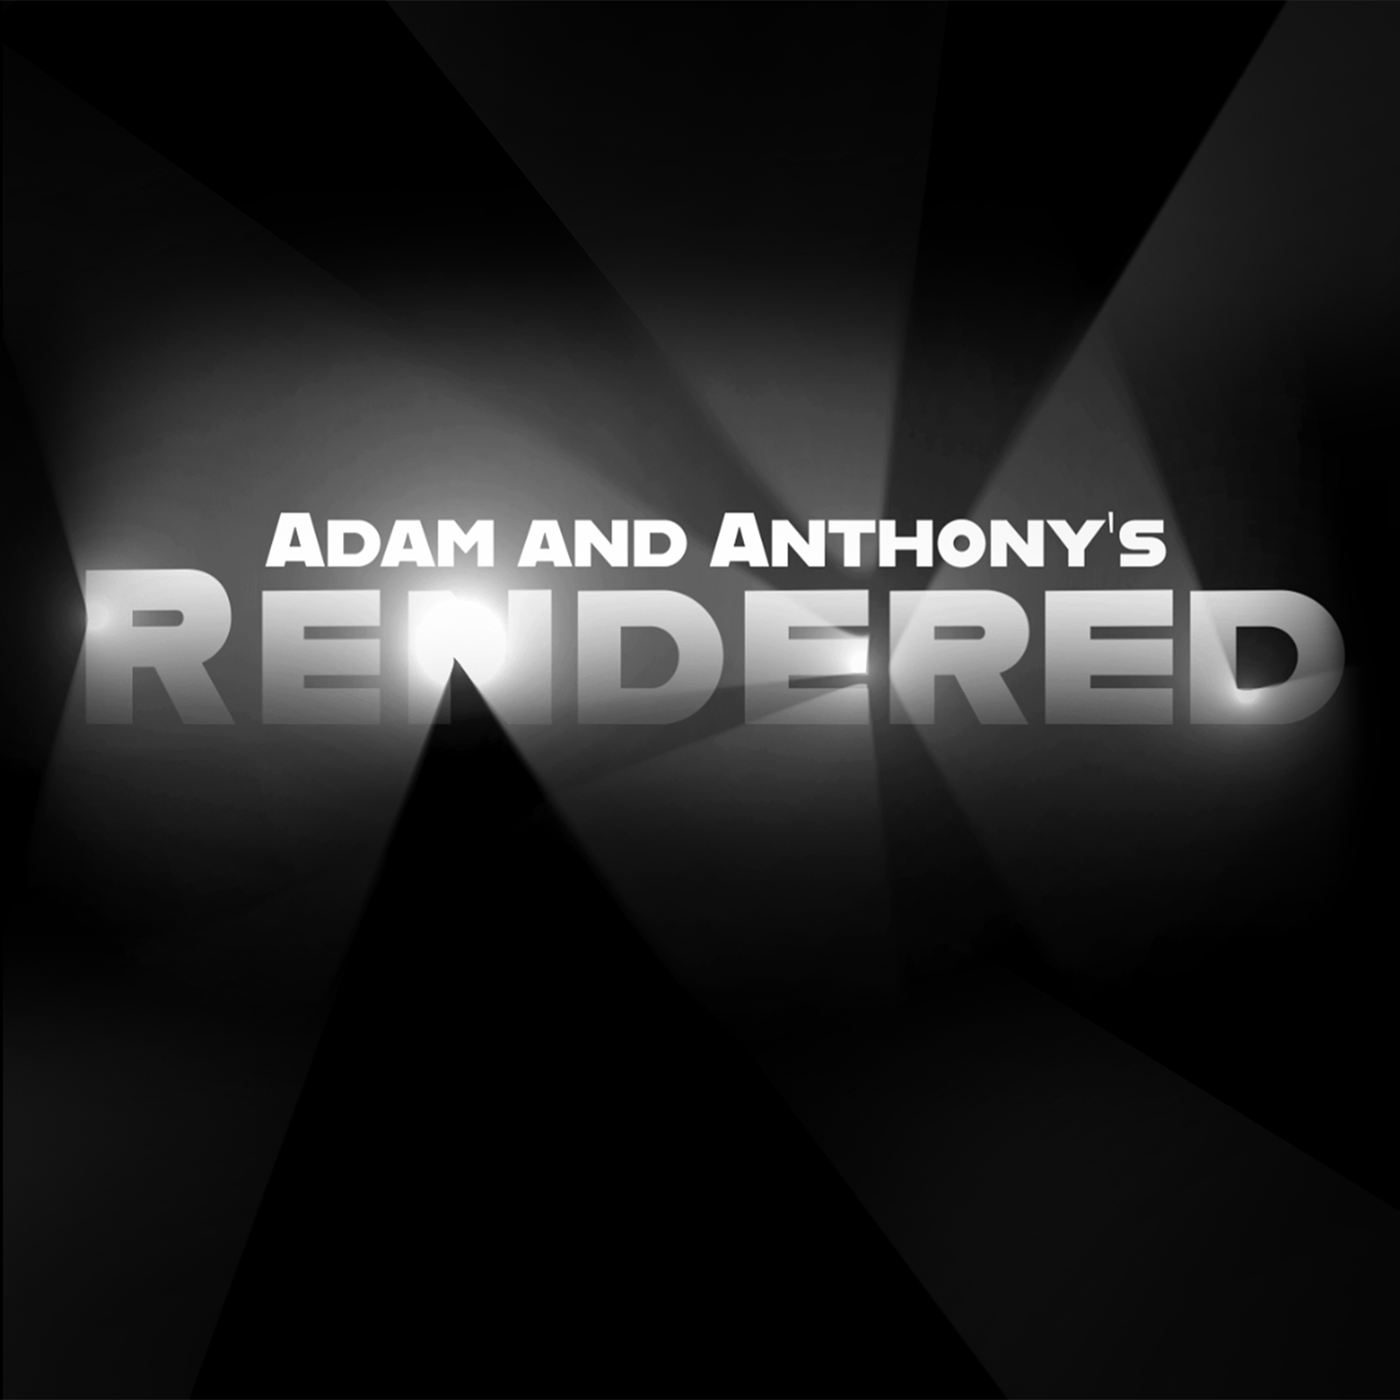 Adam and Anthony's Rendered